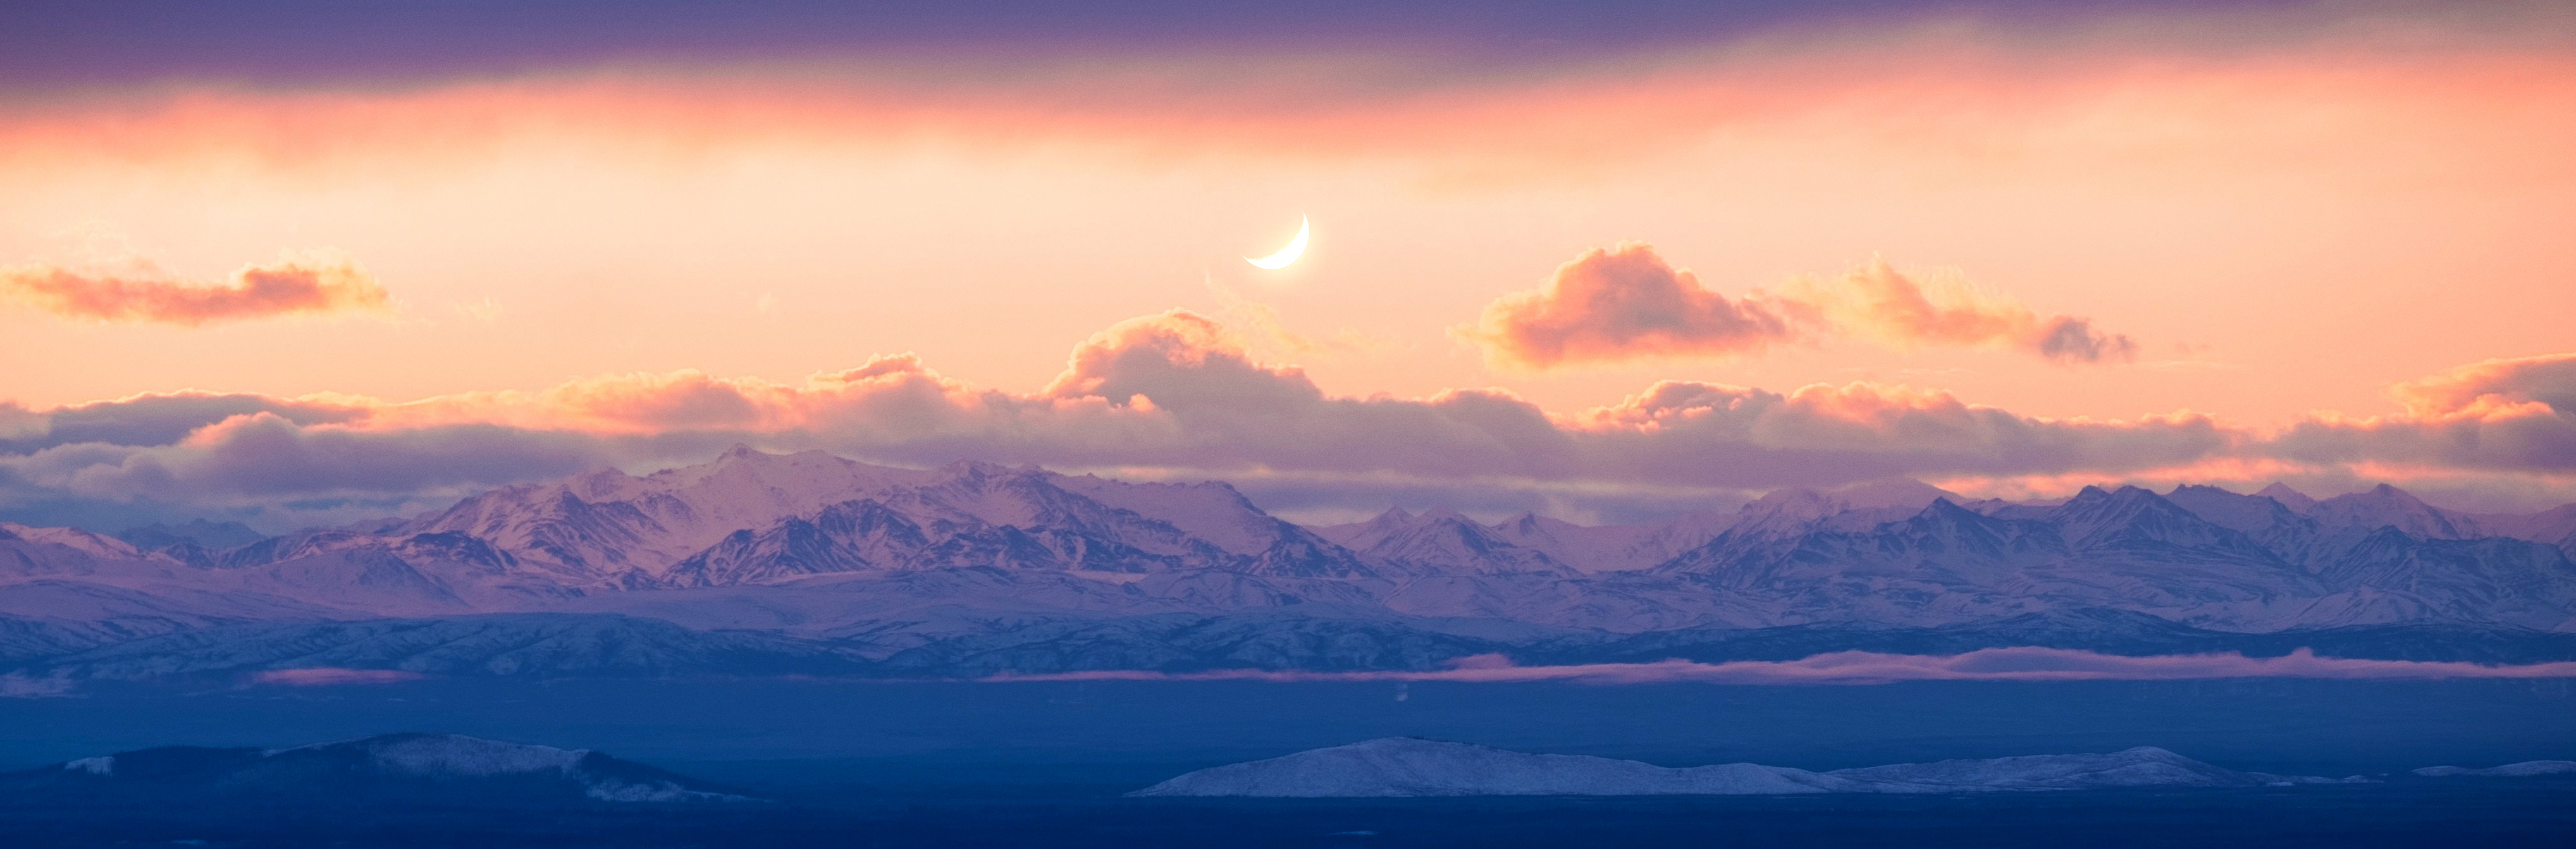 Landscape Mountains Snowy Mountain Clouds Moon Sunset Long Image 4073x1343